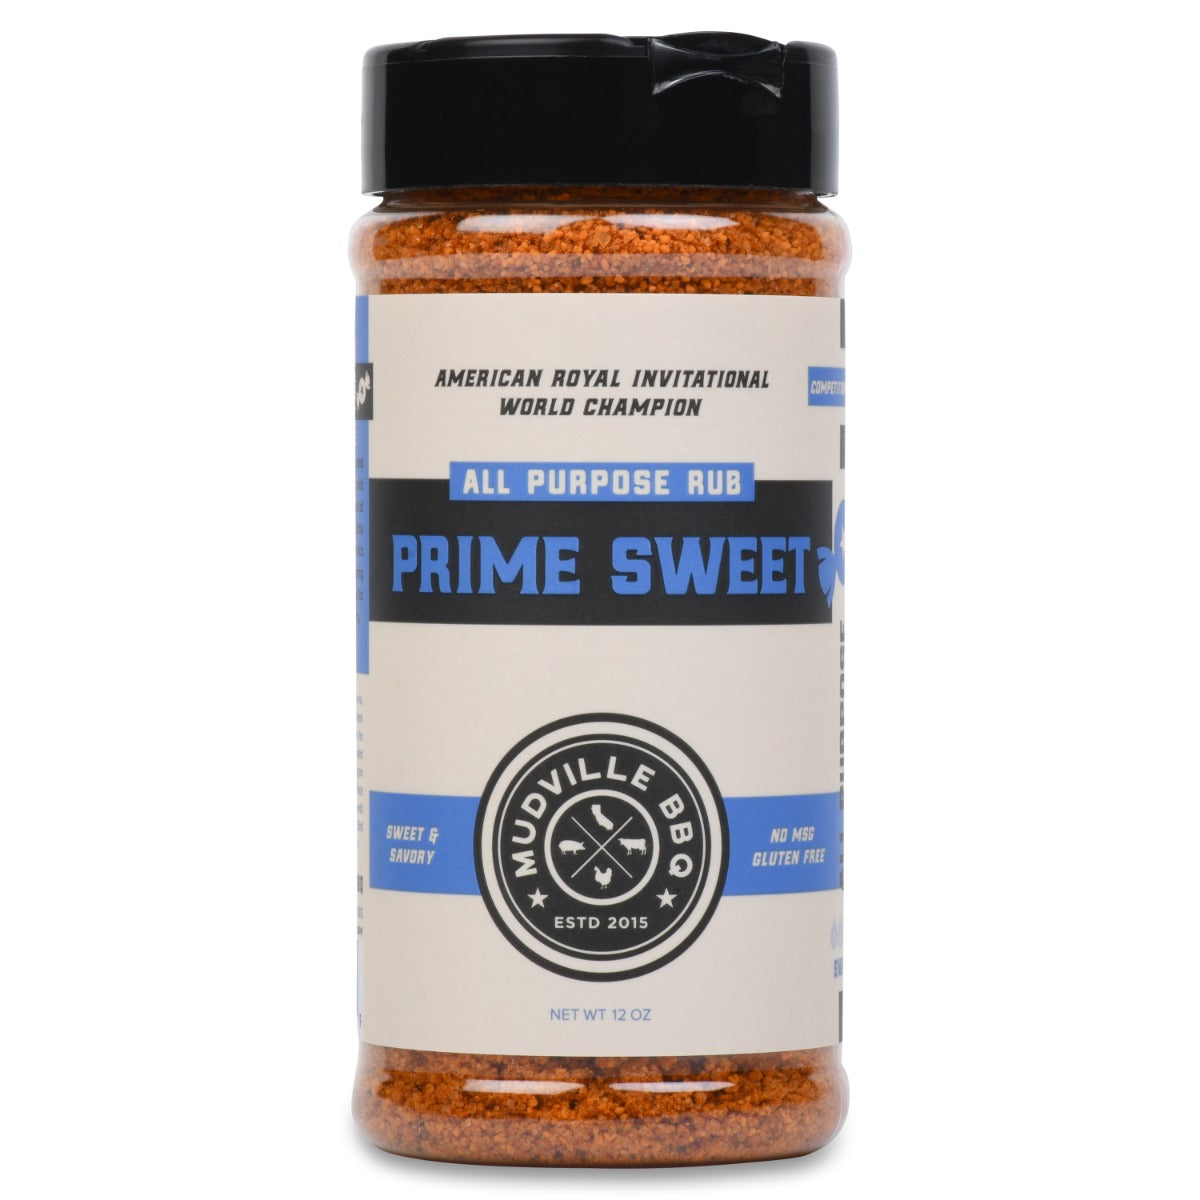 Front view of a Mudville BBQ "Prime Sweet" all-purpose rub bottle. The label states it is an award-winning blend suitable for various meats and vegetables, with a sweet and savory flavor profile.